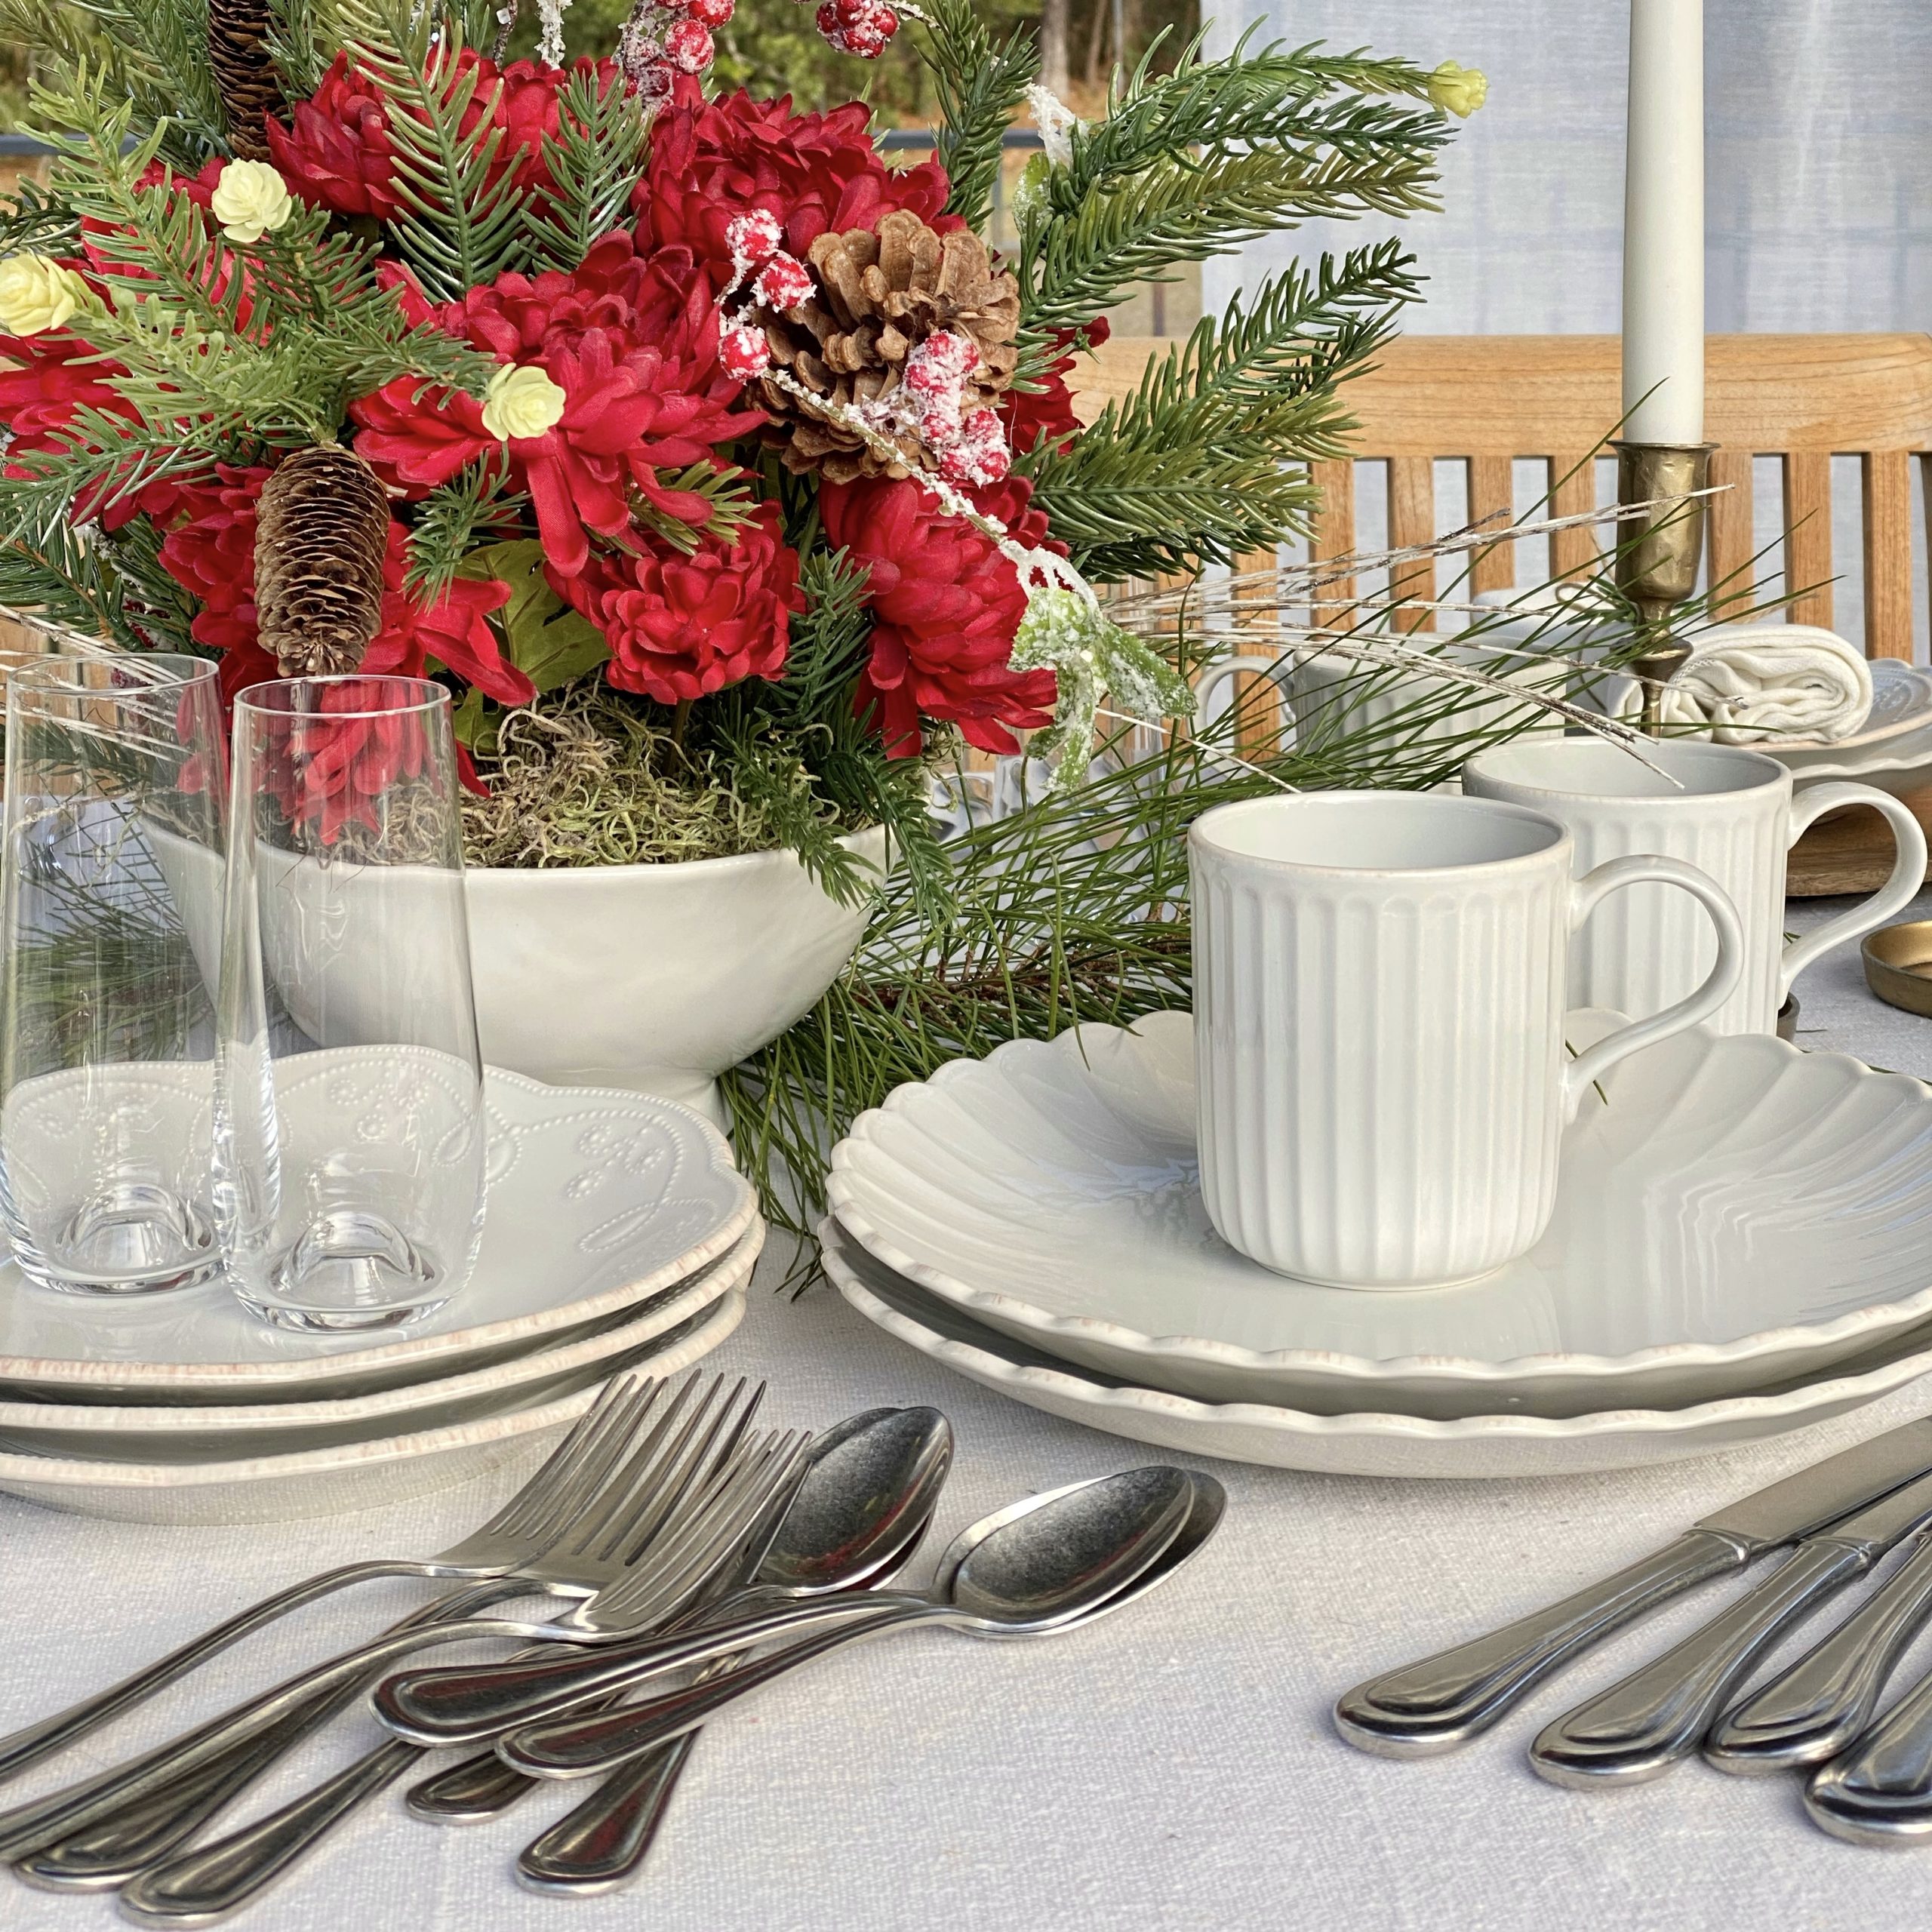 Lenox dishes and flatware set out on the table in front of the red floral centerpiece.